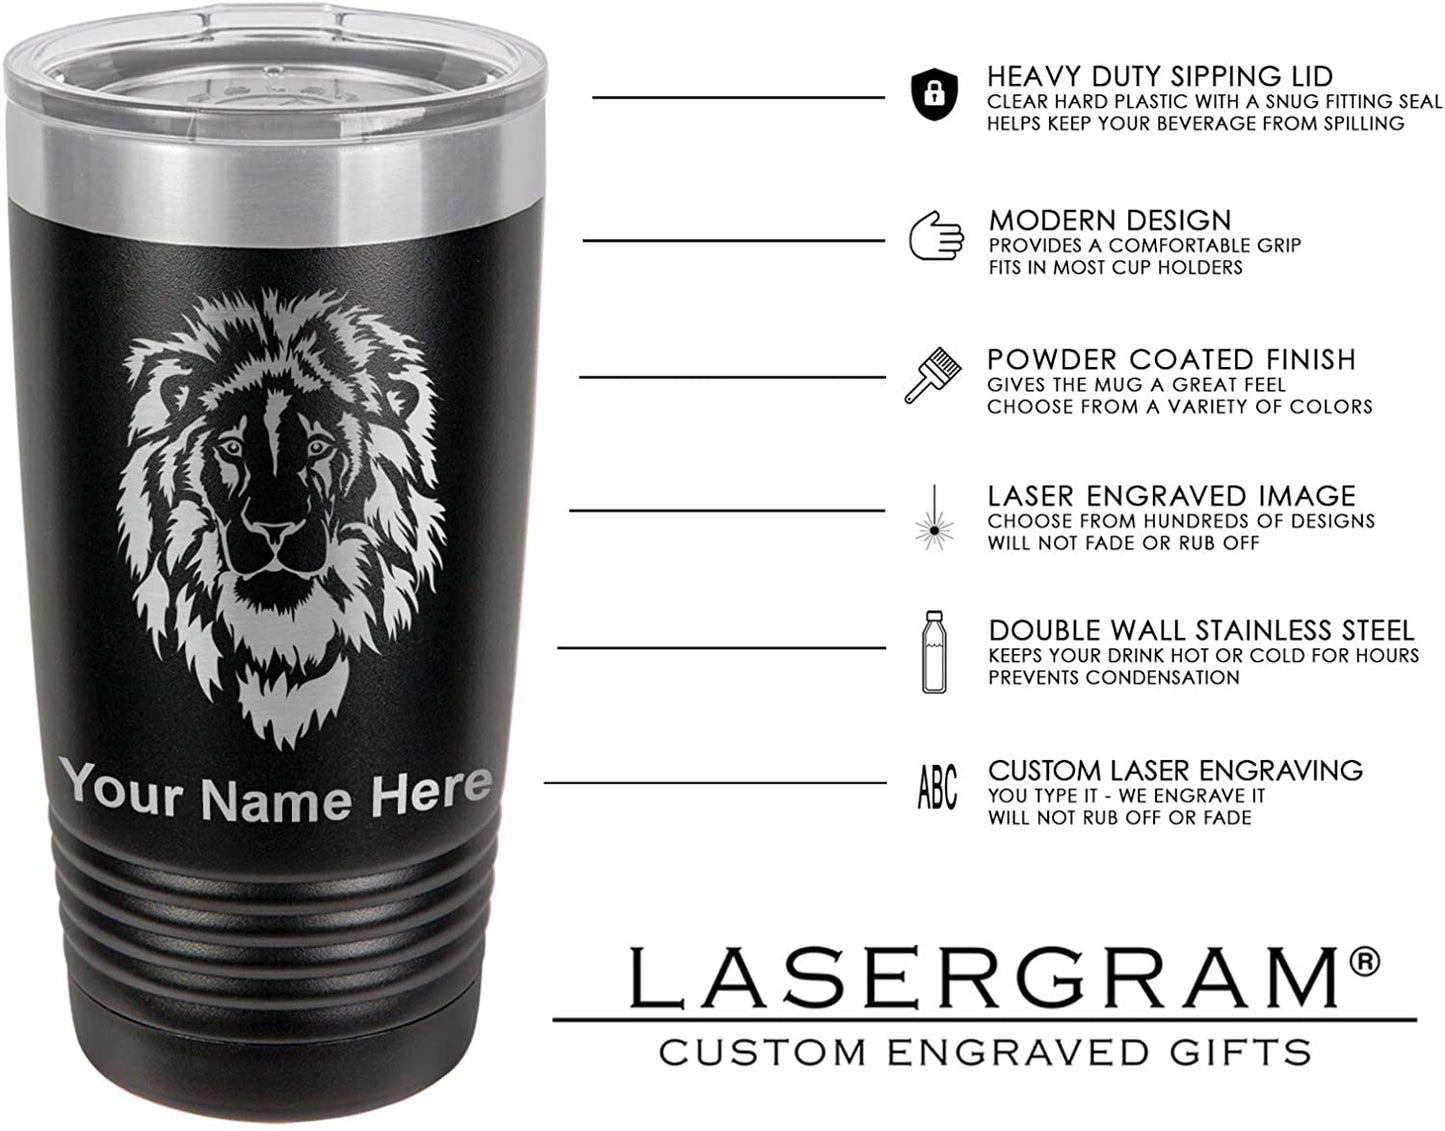 20oz Vacuum Insulated Tumbler Mug, Zodiac Sign Pisces, Personalized Engraving Included